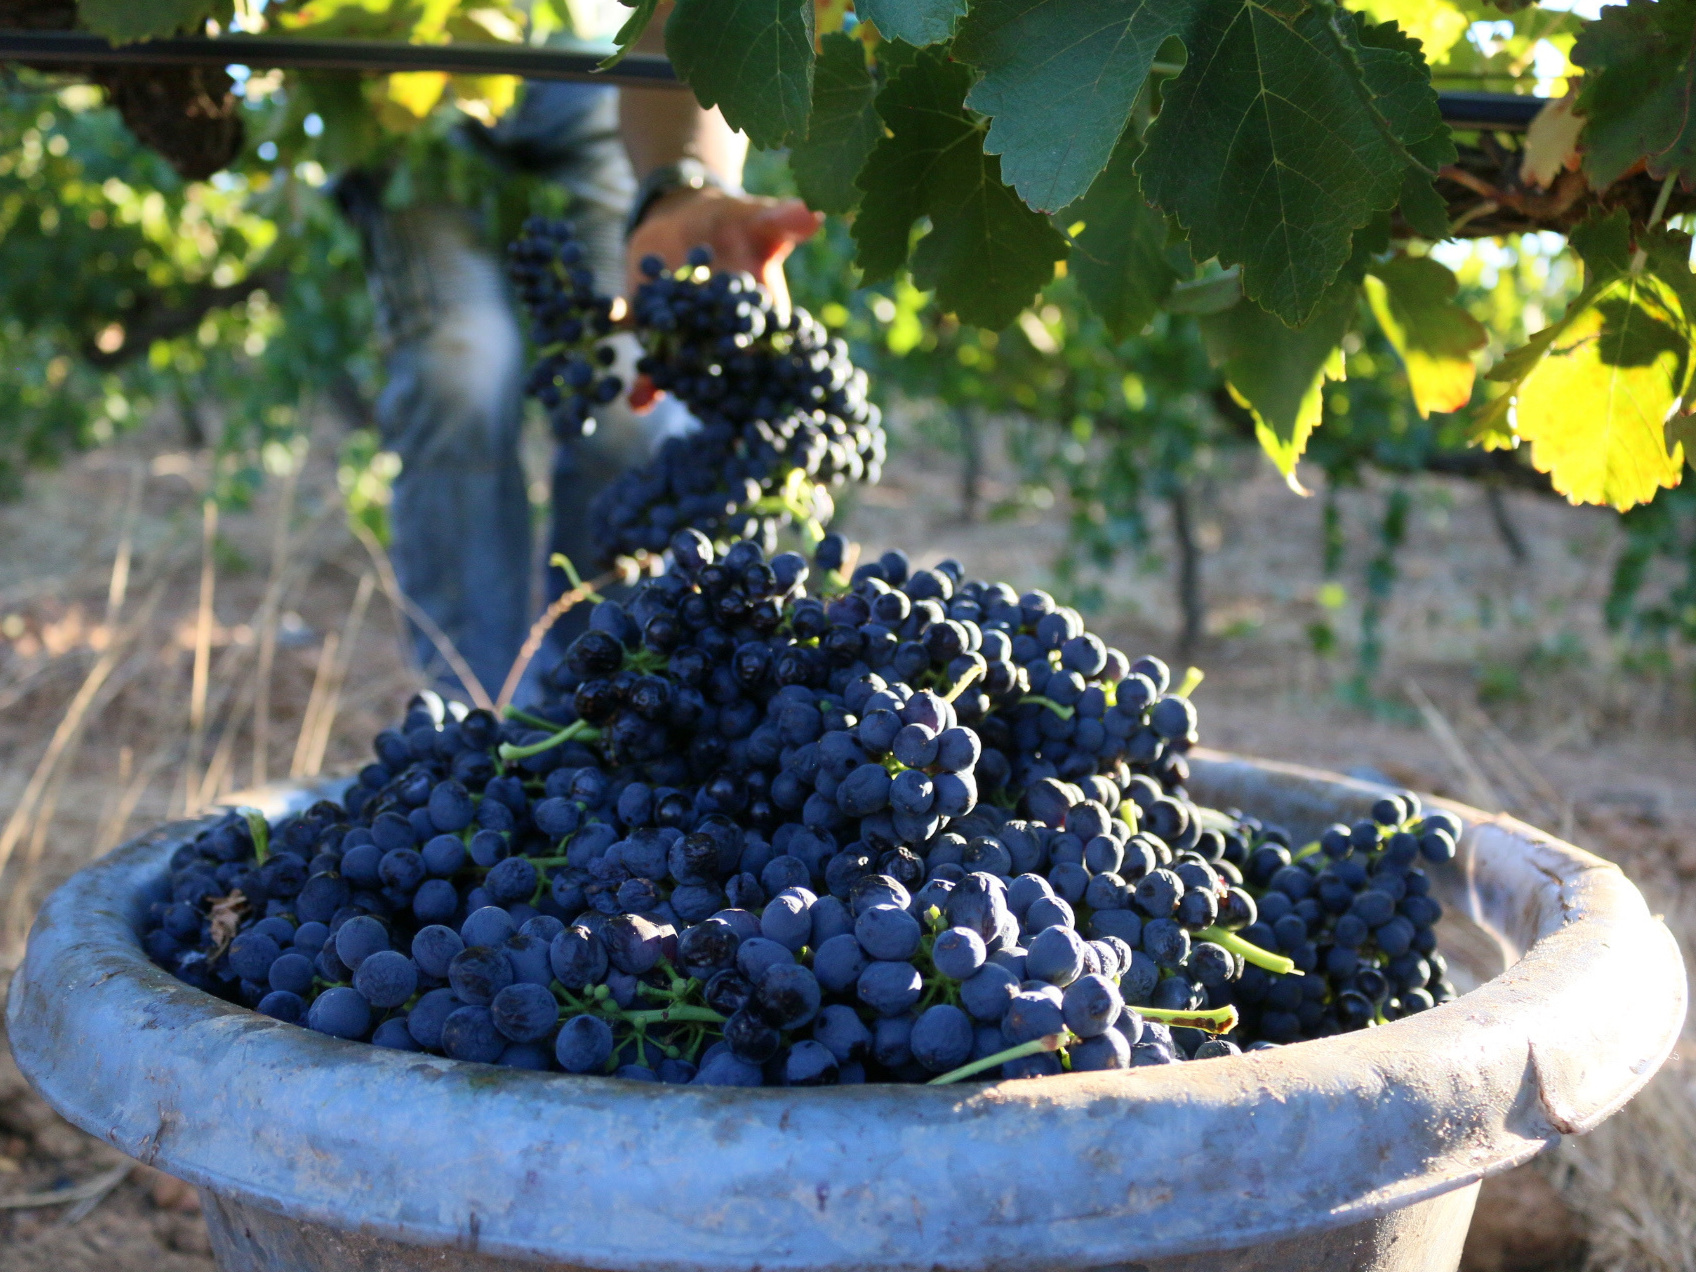 The grapes are all harvested using secateurs. Once a bucket is filled, it's poured into a truck. When the truck reaches capacity, it carries the grapes to the cellar.